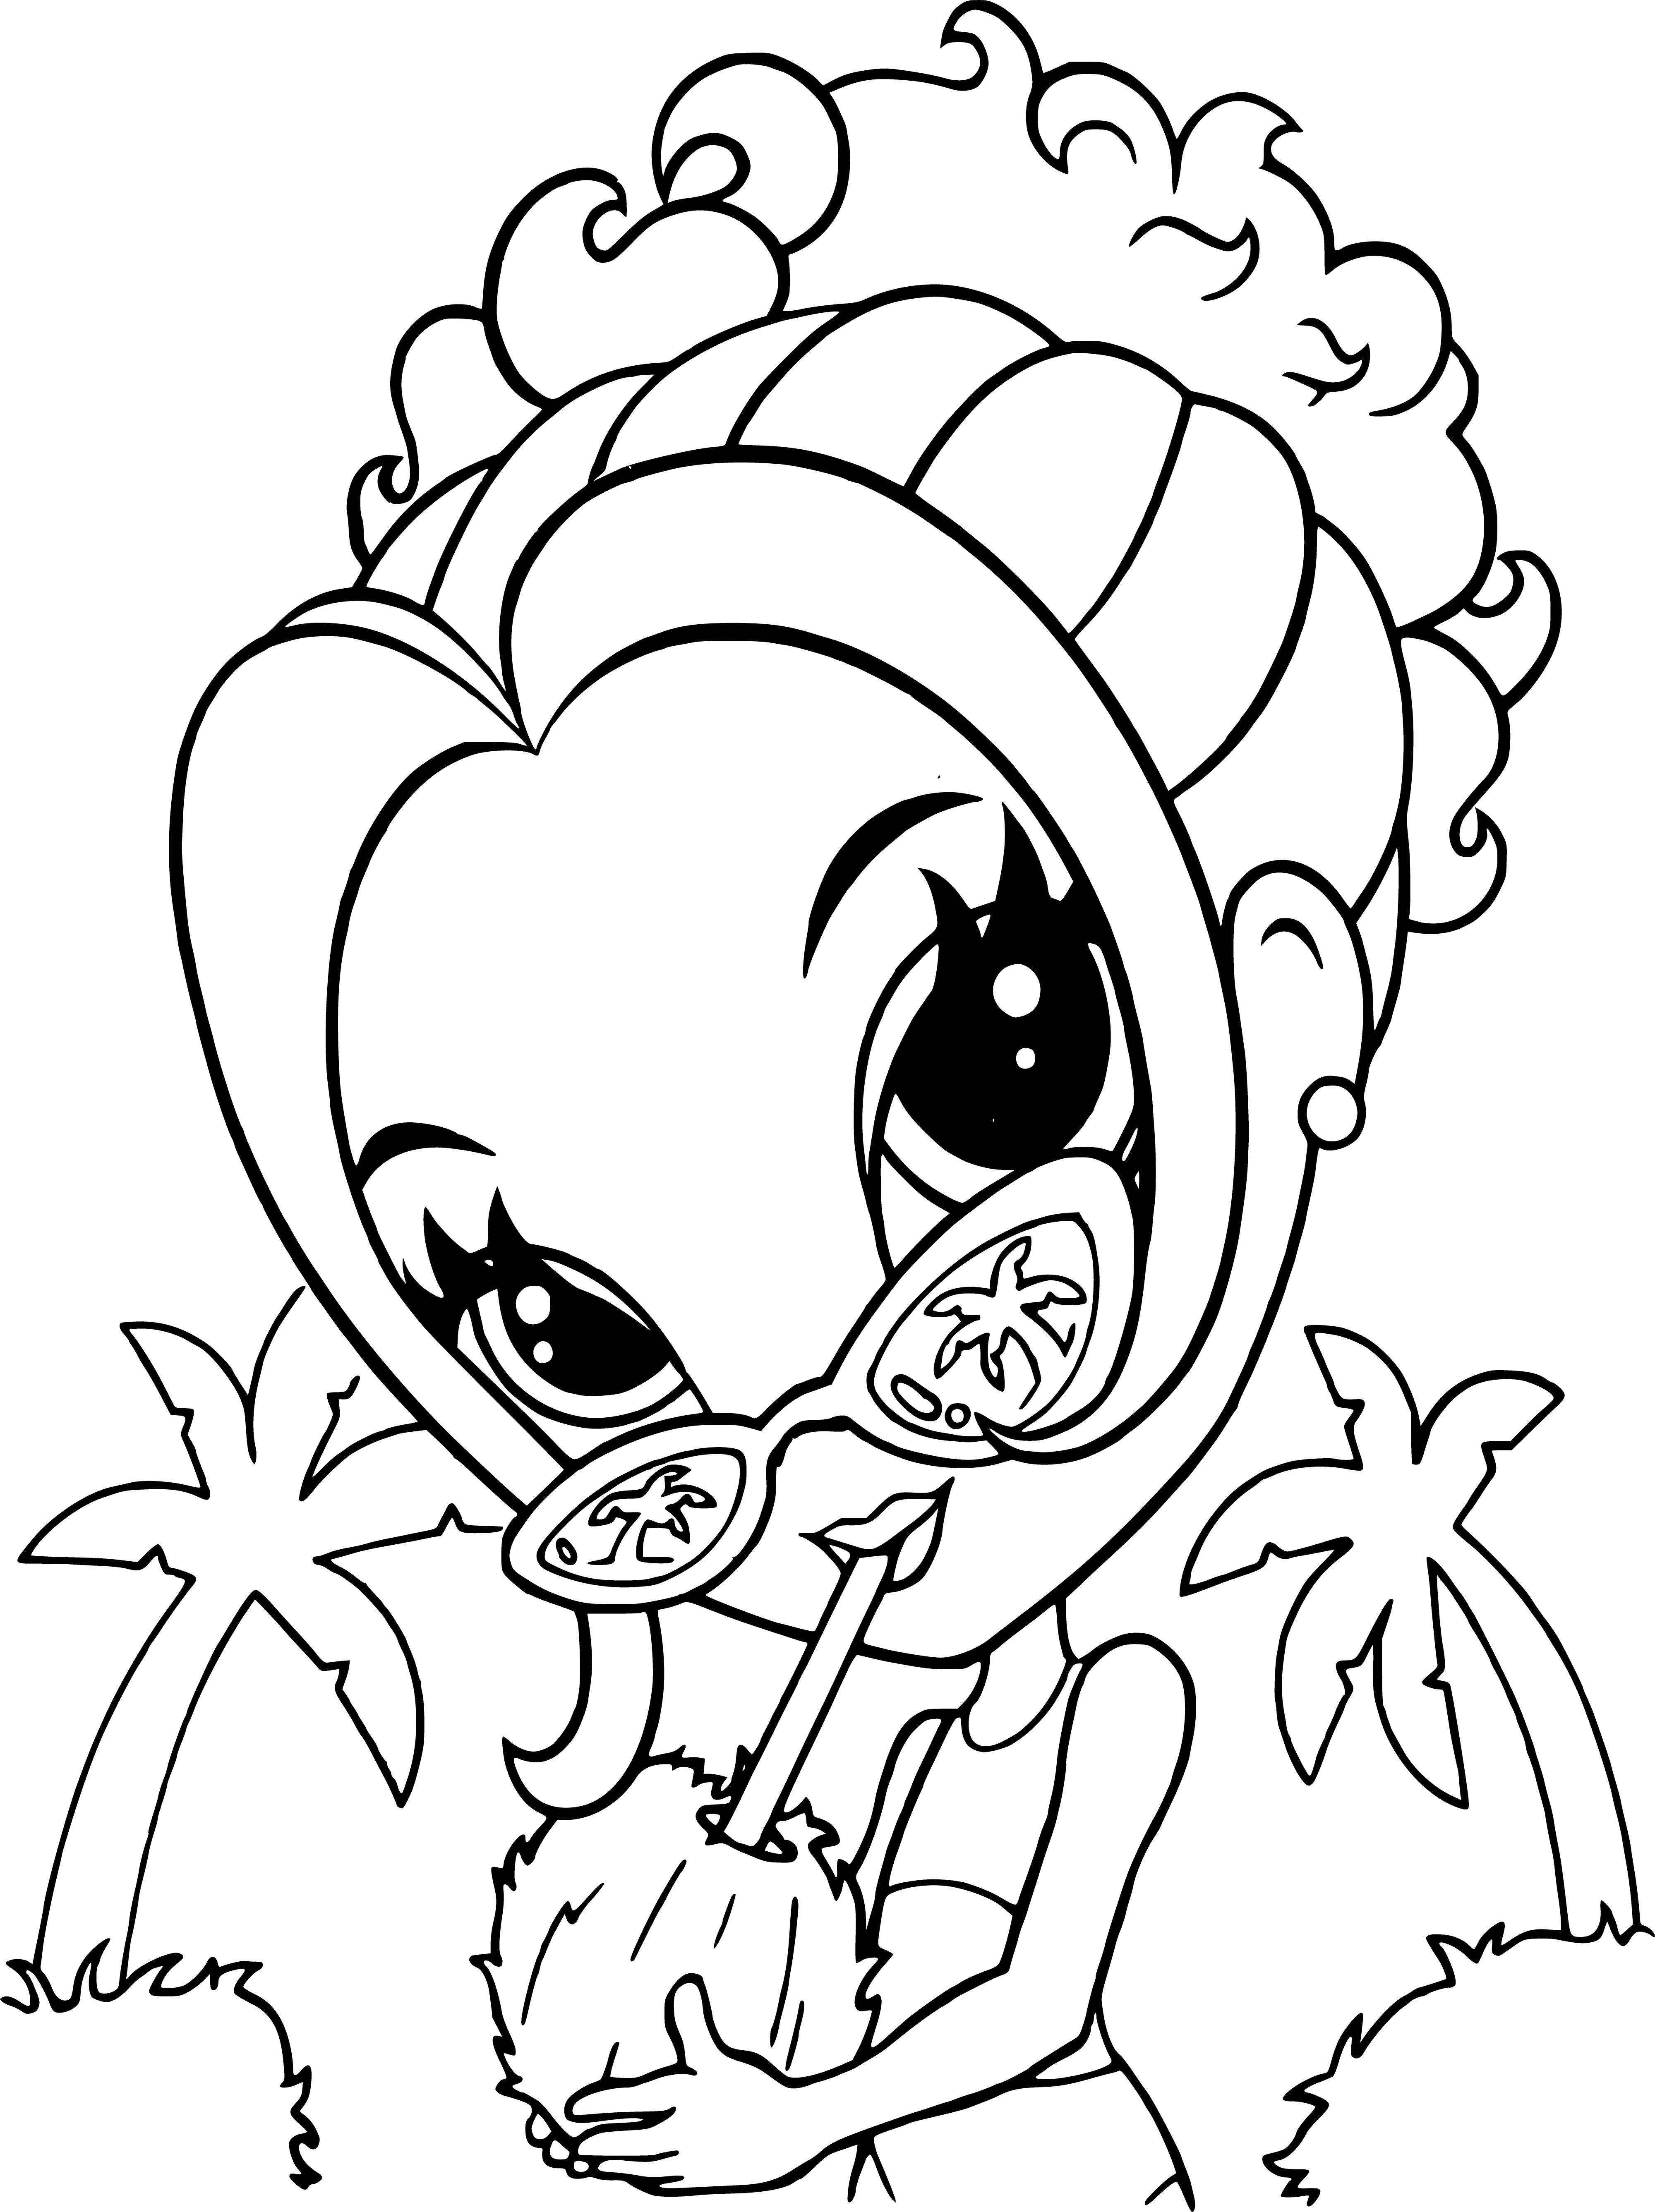 coloring page: Glam girl in pink dress and fur stole, with updo, earrings, cig and champagne, ready for a night out!